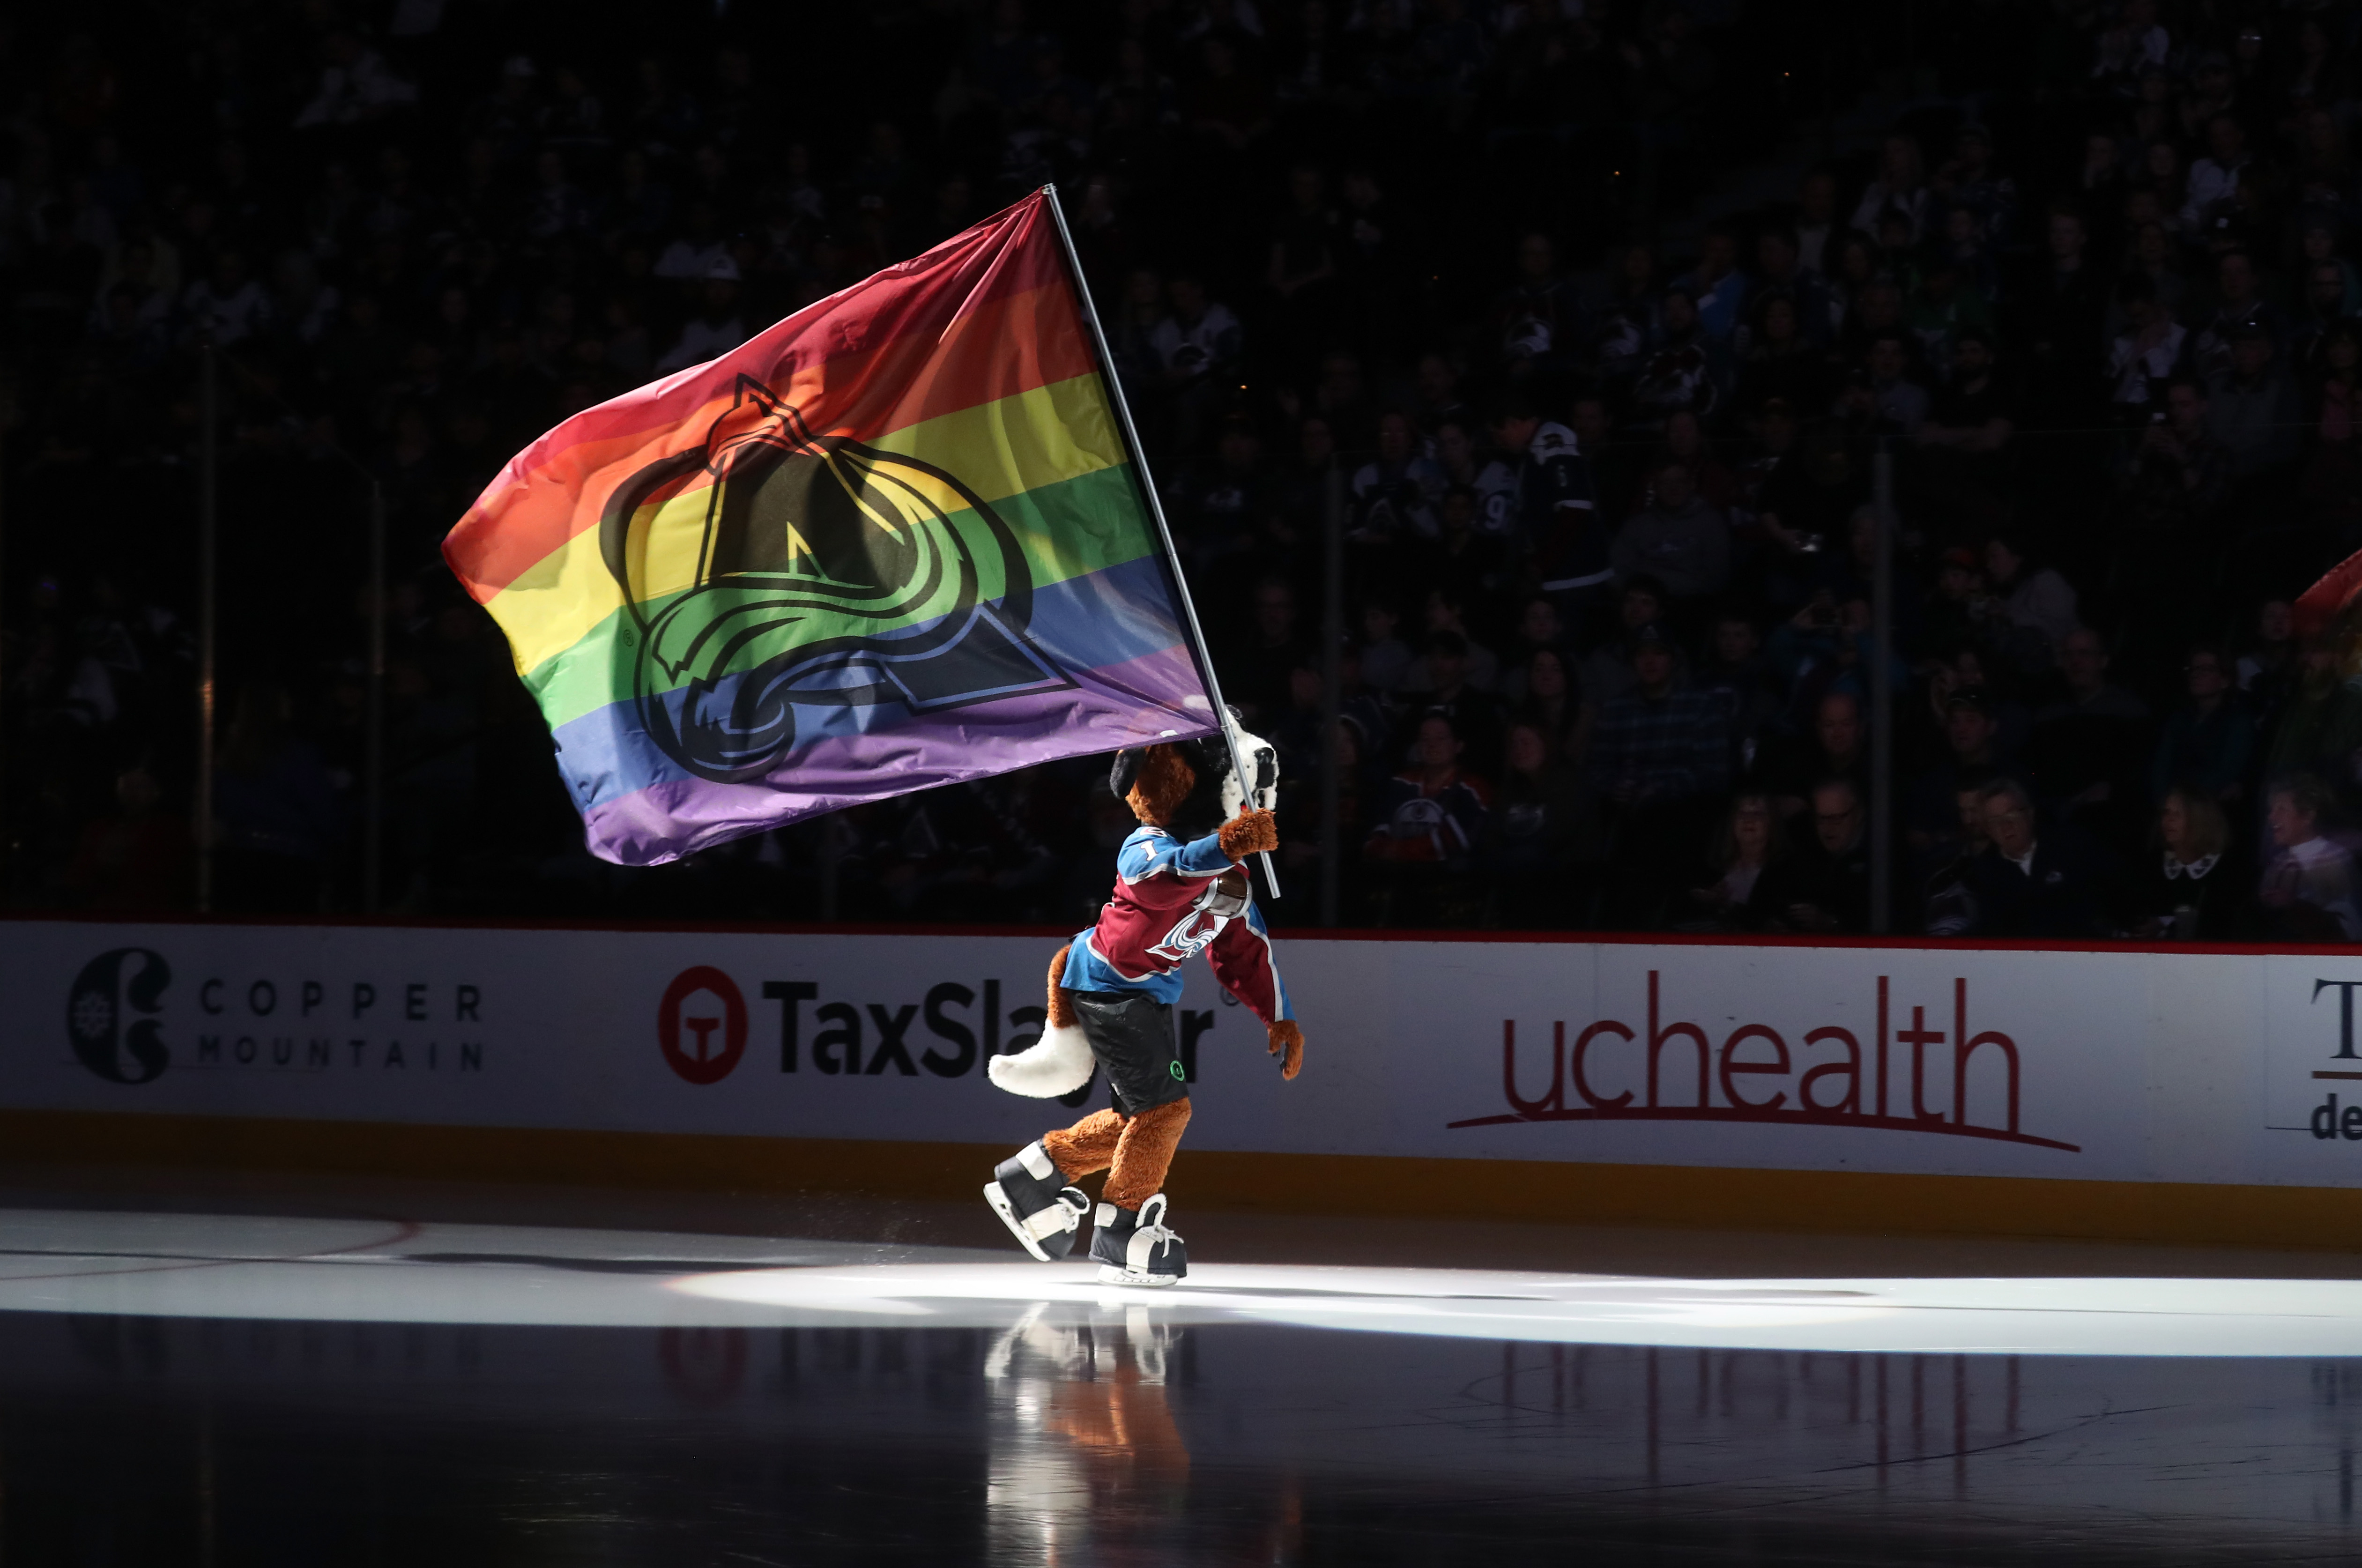 Colorado Avalanche Continue to Disappoint with Pride Night